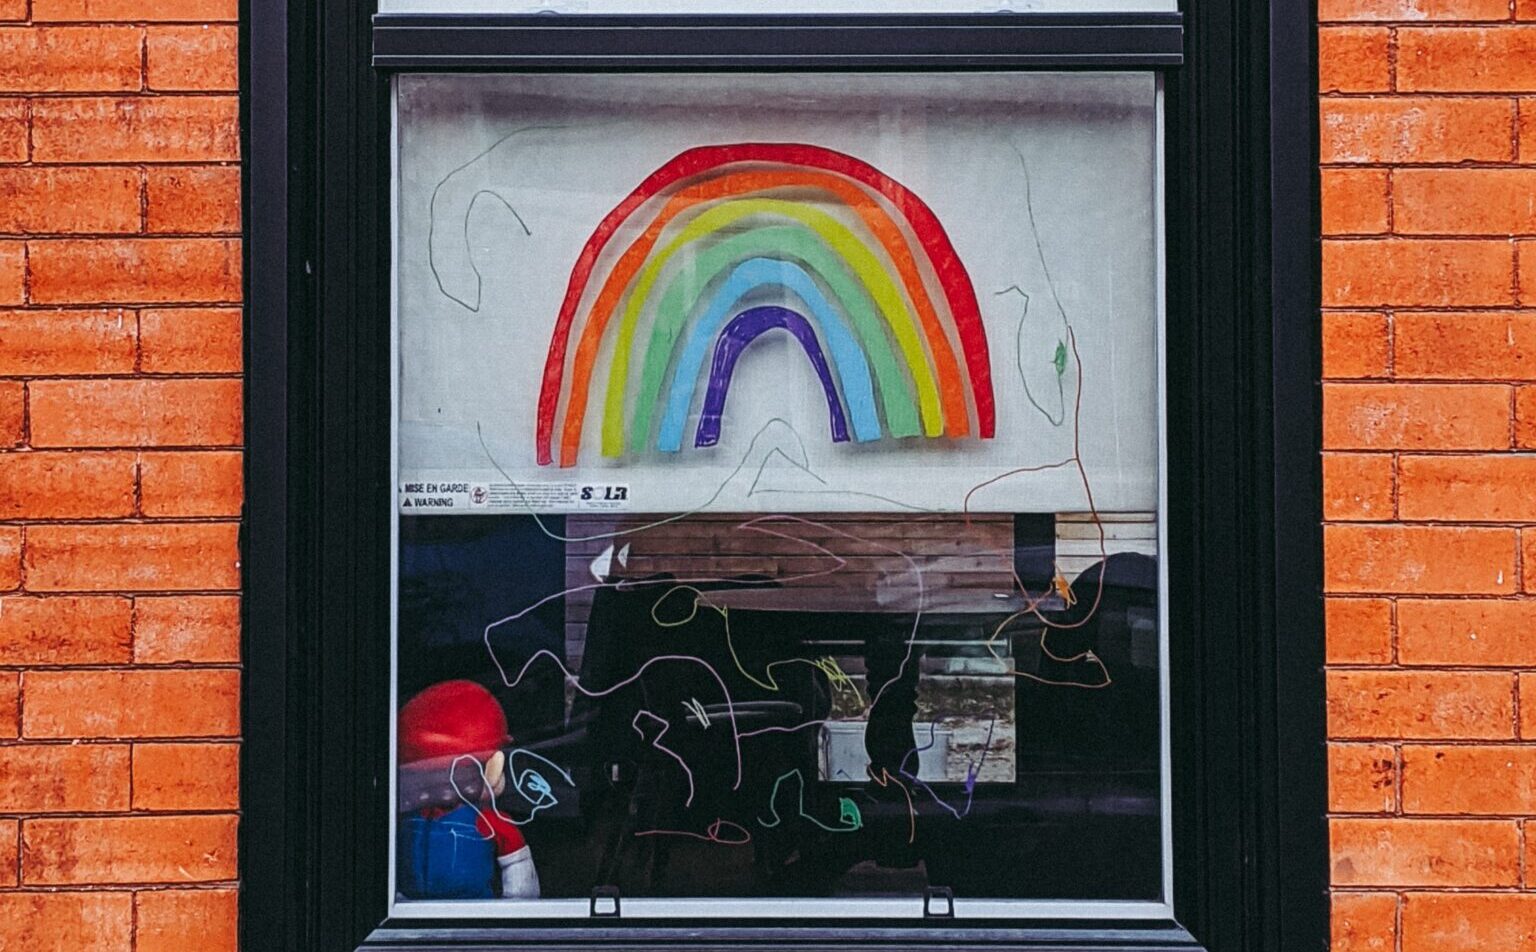 A rainbow is painted in the window of a brick building